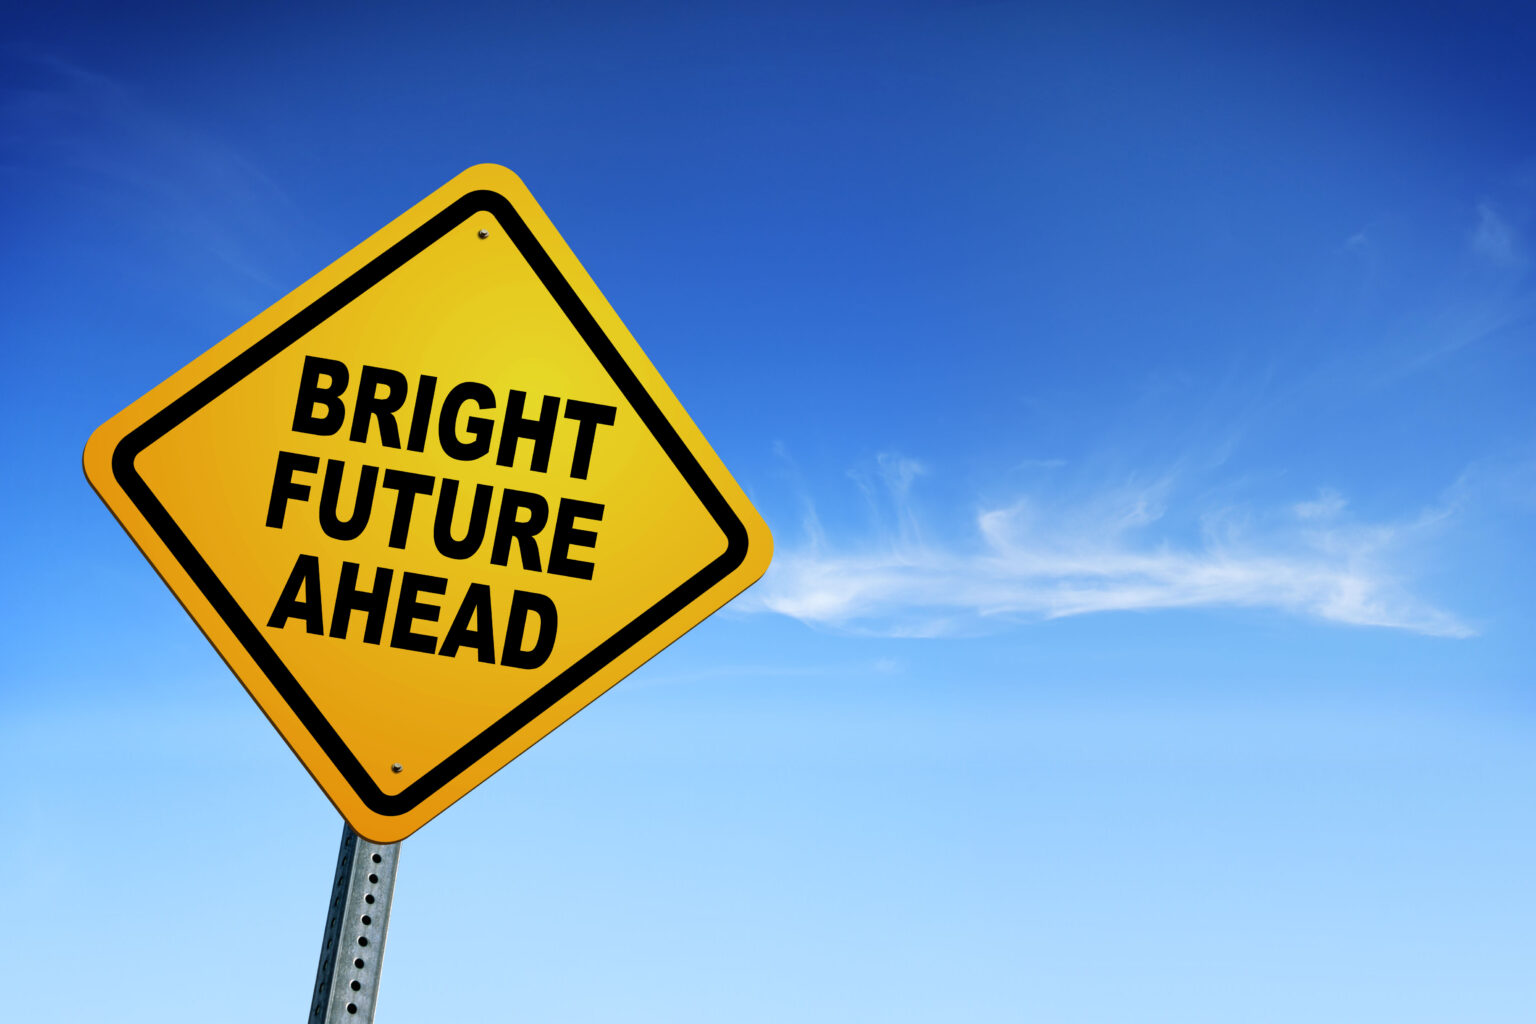 road-sign-says-bright-future-ahead-can-you-really-stay-in-god's-will-all-the-time